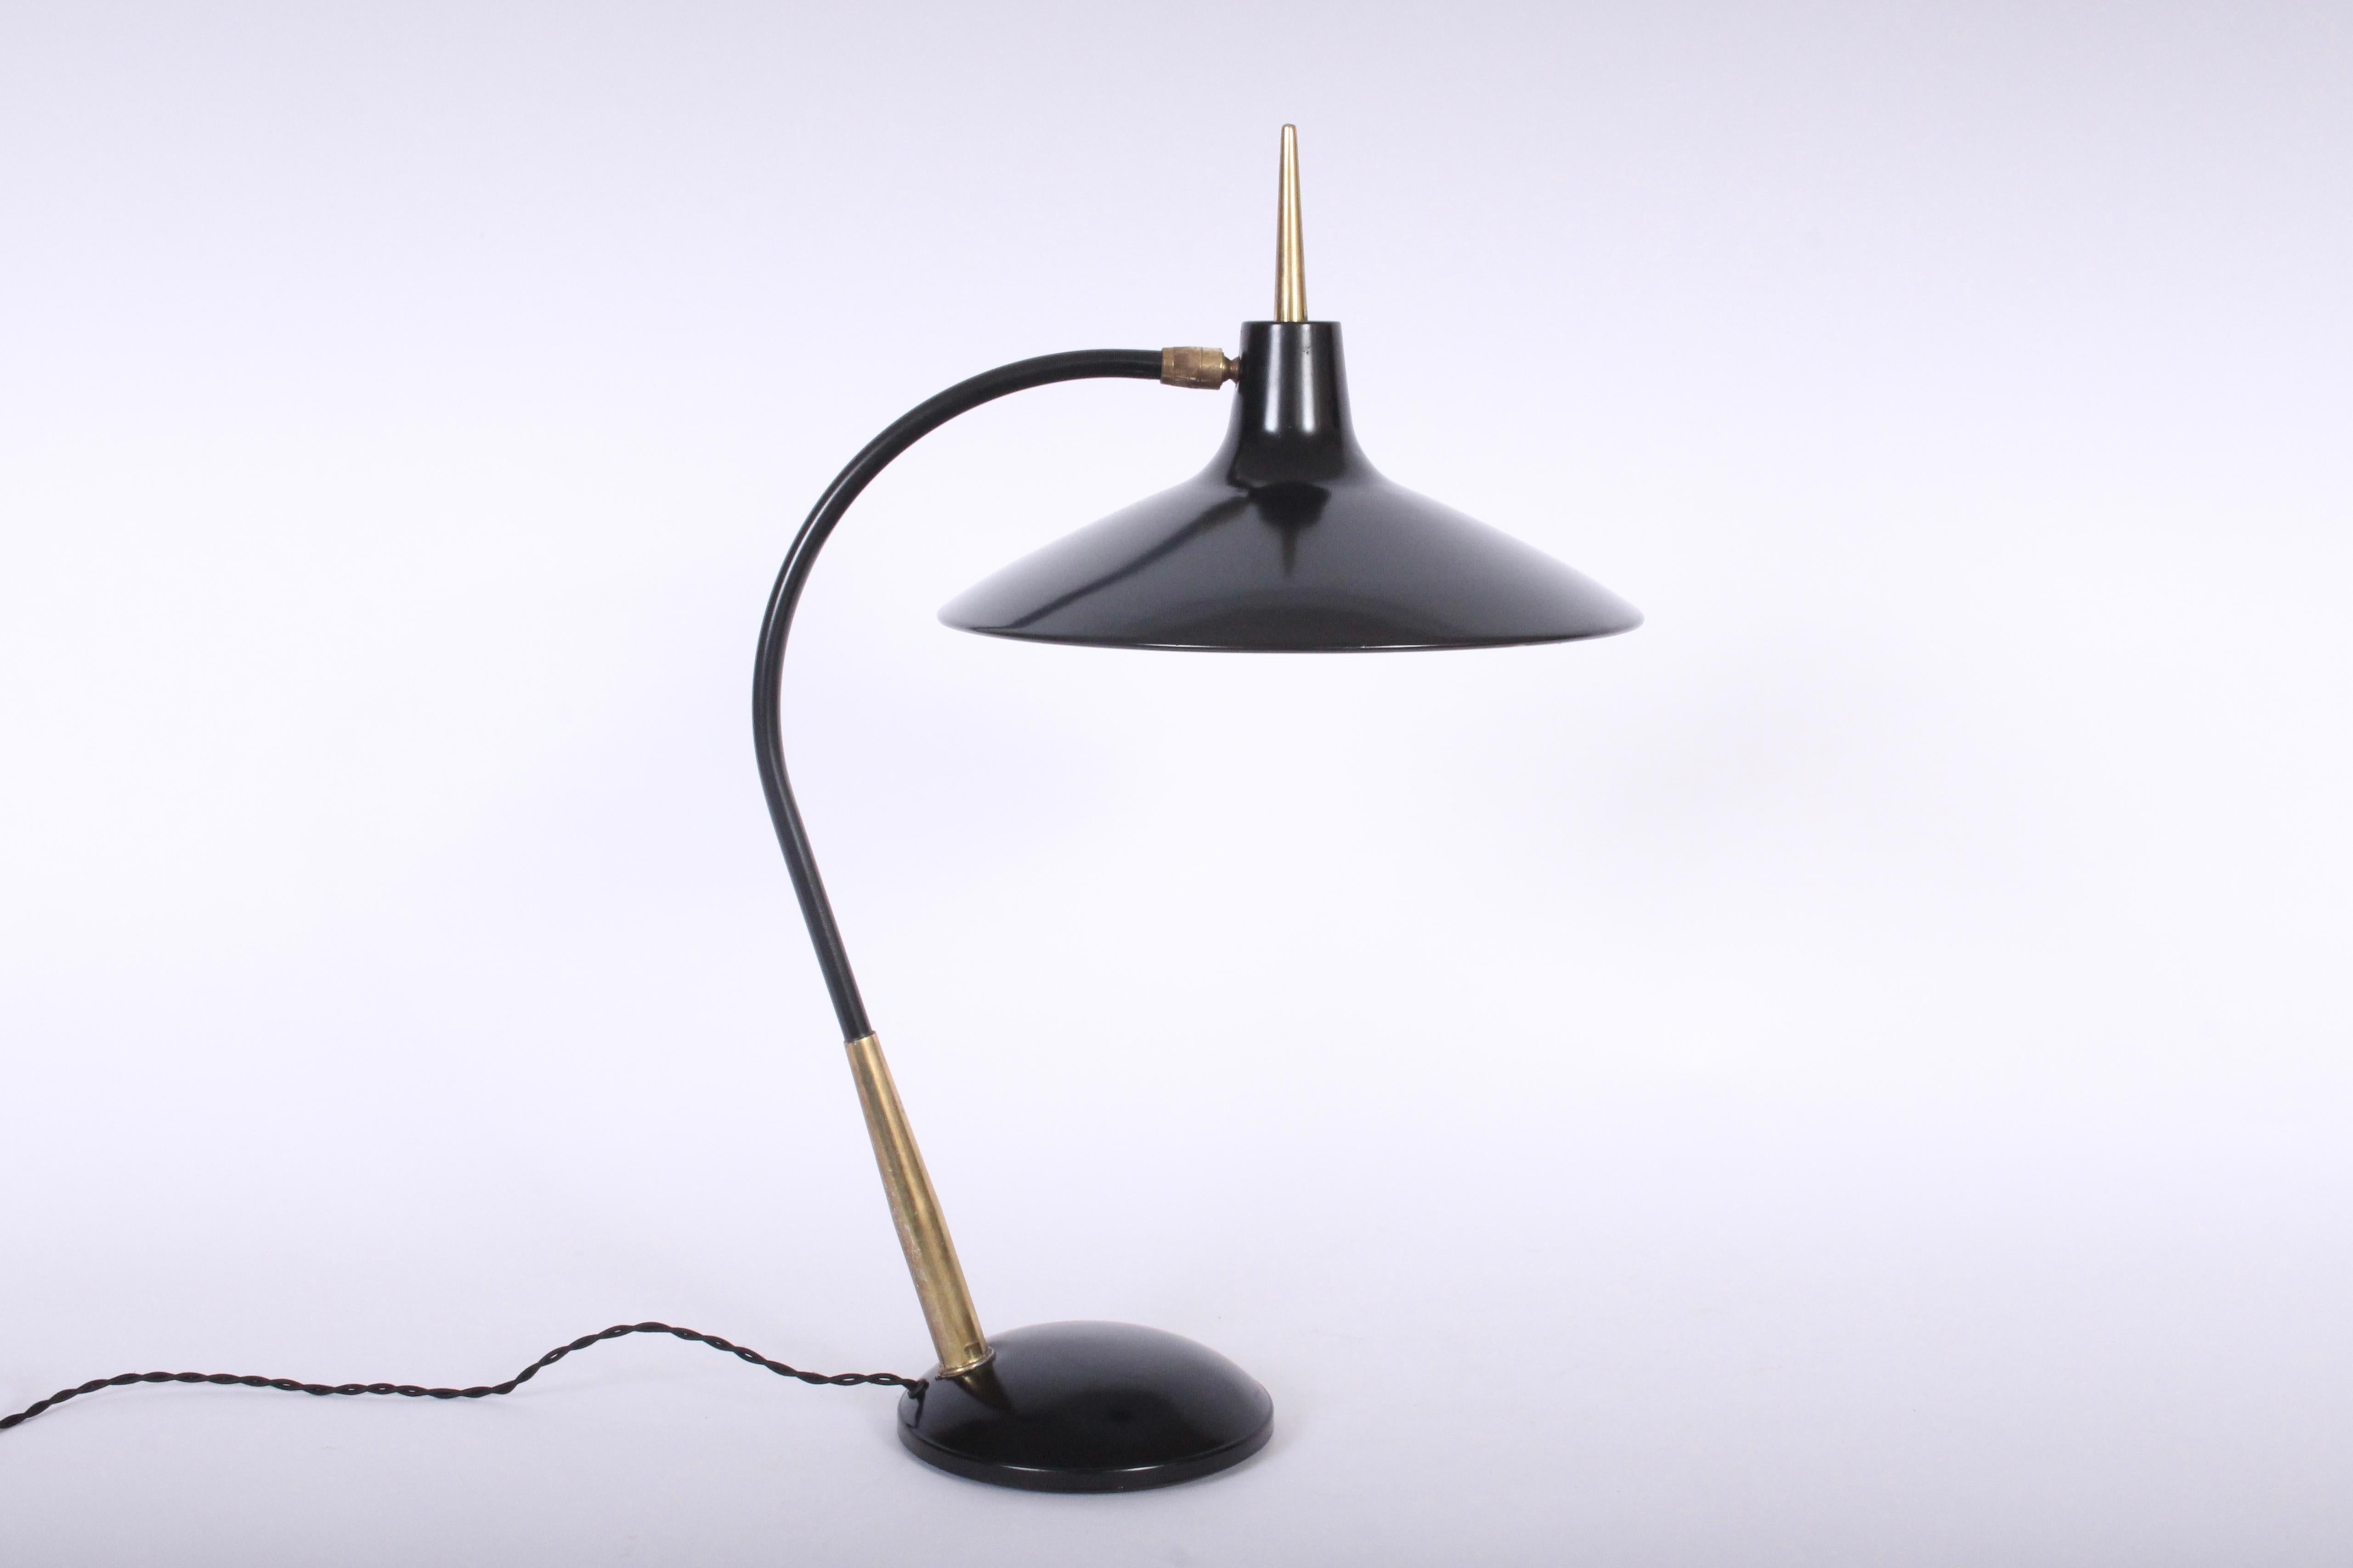 Italian modern black and brass Laurel Lamp Co. Table lamp attributed to Gio Ponti. Featuring a Black enameled adjustable 15D tilt shade, stem and base with patinated Brass details. Base 6.5D. Without reflector shade. With new brass replacement knob.